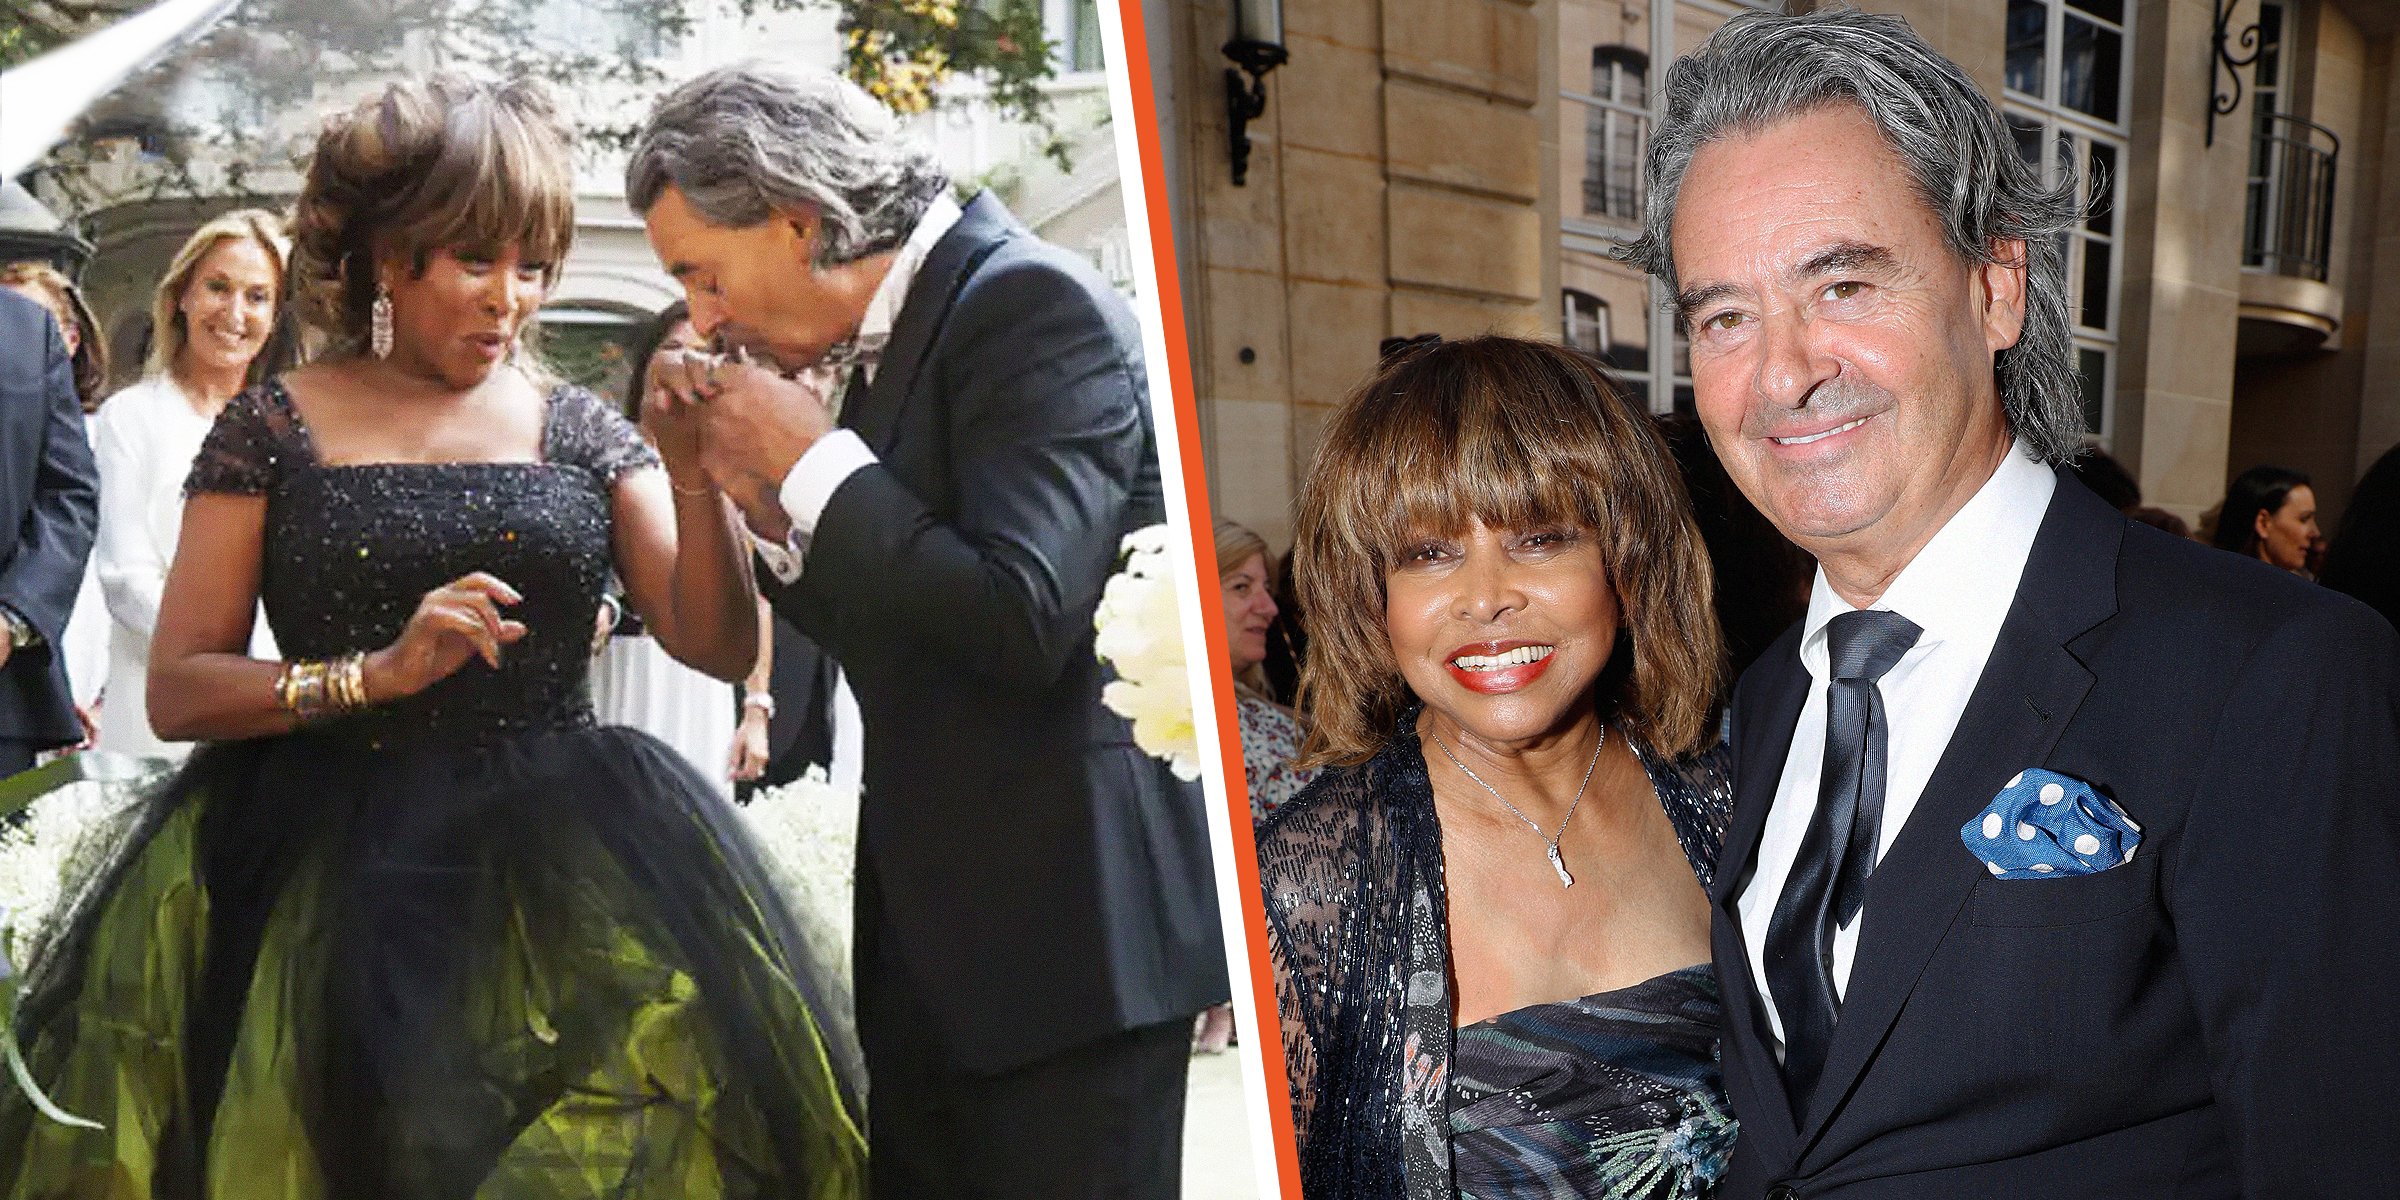 Tina Turner and Erwin Bach | Tina Turner and Erwin Bach | Source: Getty Images | Instagram.com/tinaturner